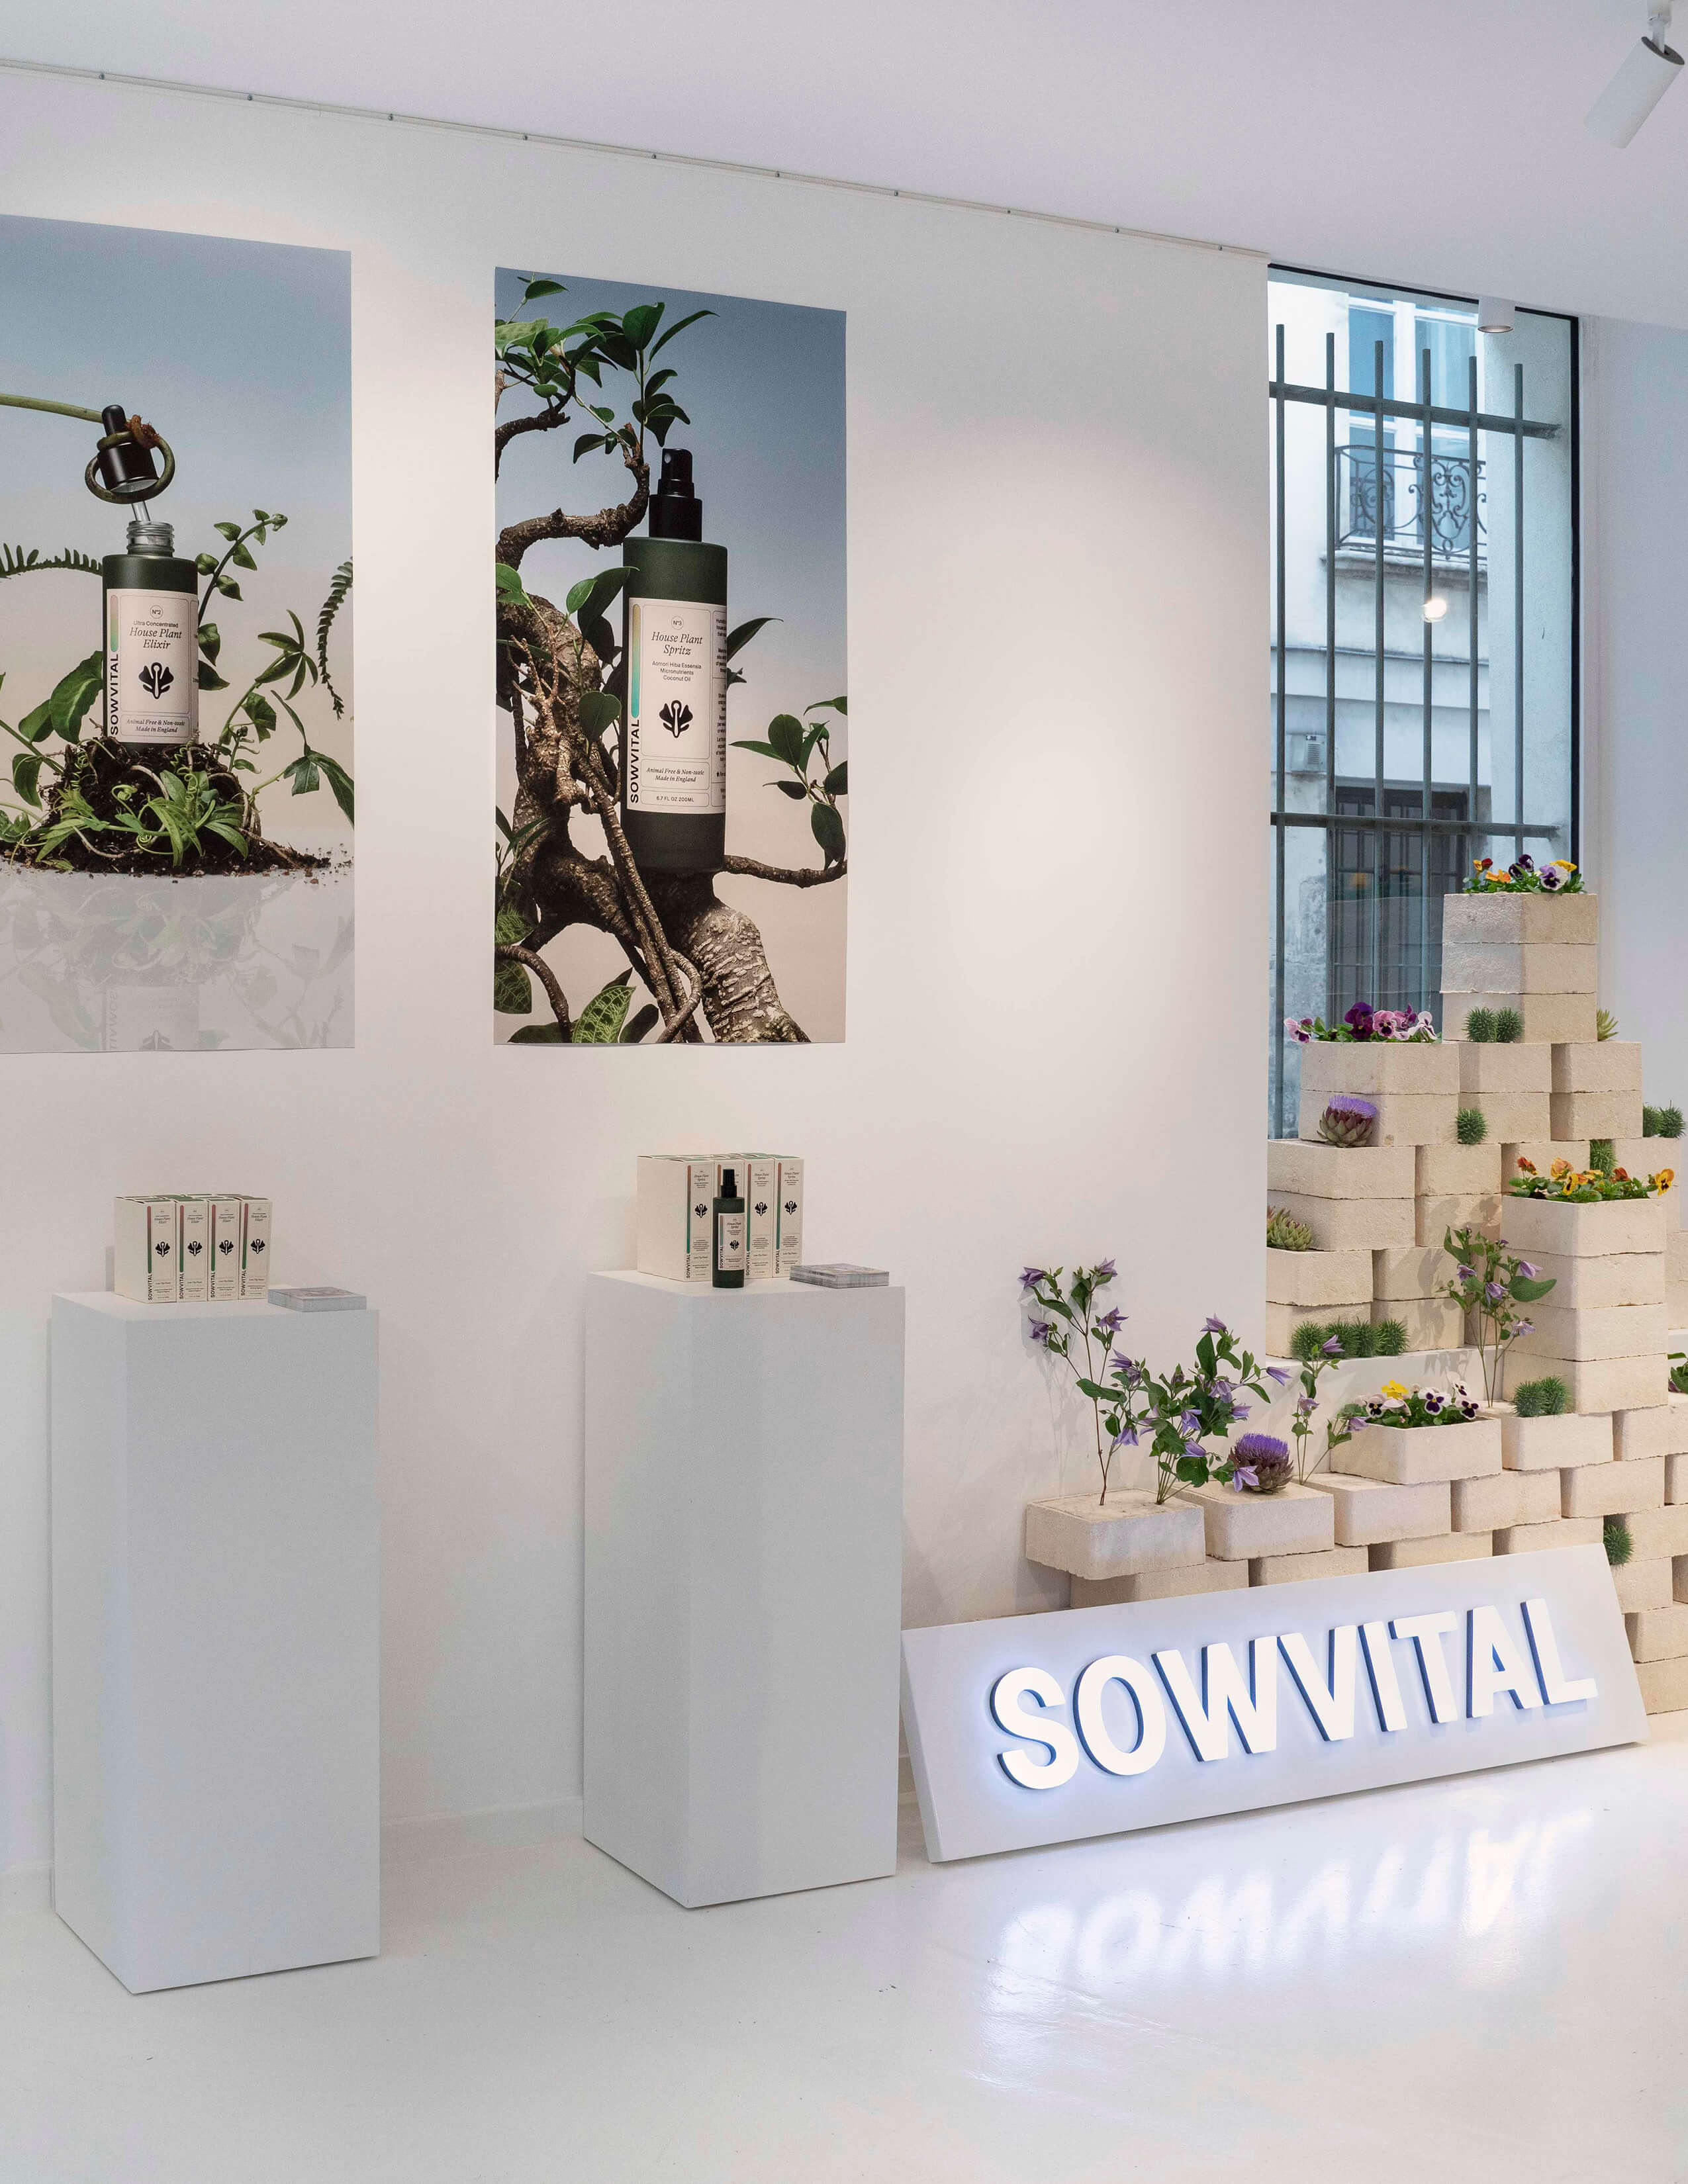 Posters of Sowvital house plant products on the wall and the products on the stands next to the Sowvital logo. Loads of different kinds of plants and flowers on the side with white cubes.